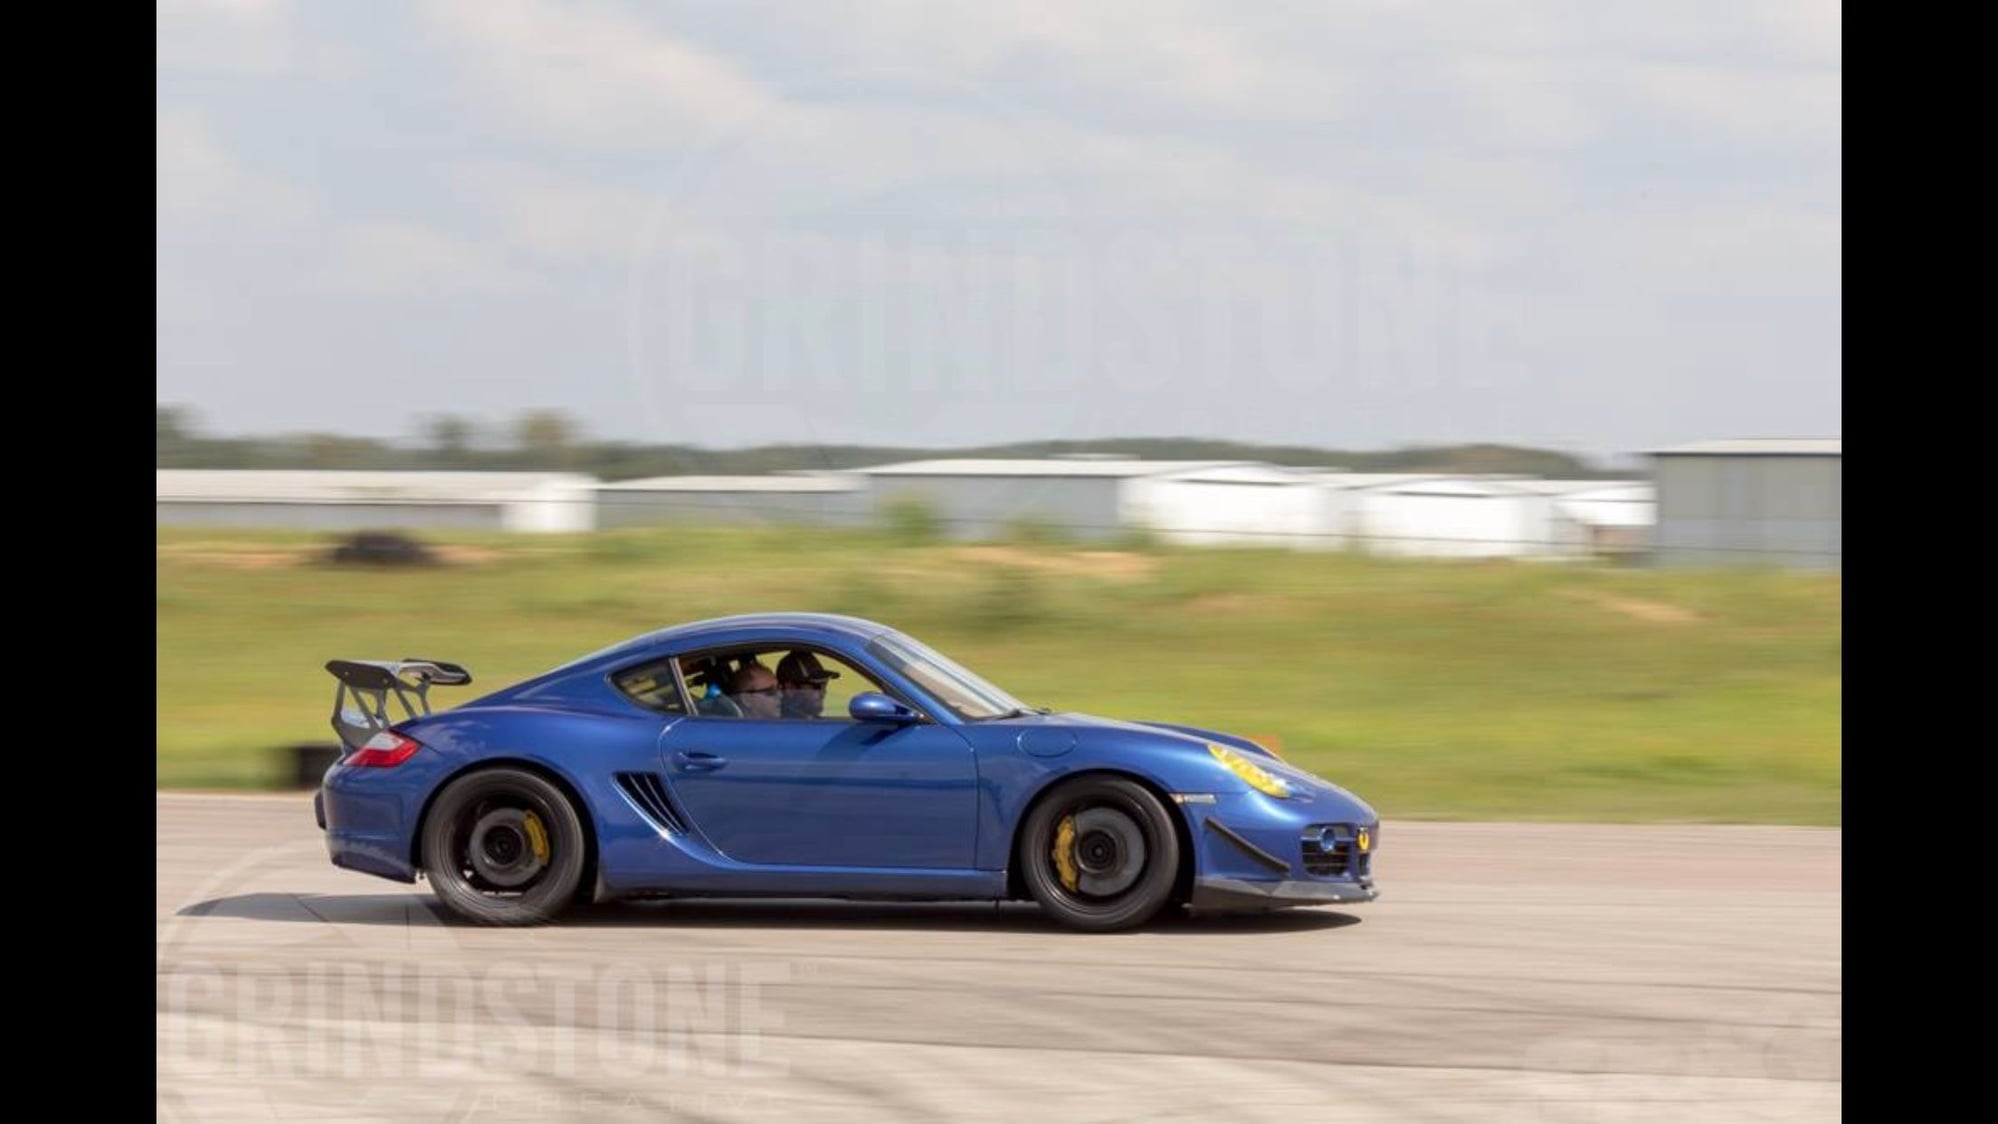 2006 Porsche Cayman - 2006 Cayman S - 4.2L Street / Track Car - Used - VIN WP0AB29836U784601 - 6 cyl - 2WD - Manual - Coupe - Blue - Memphis, TN 38112, United States